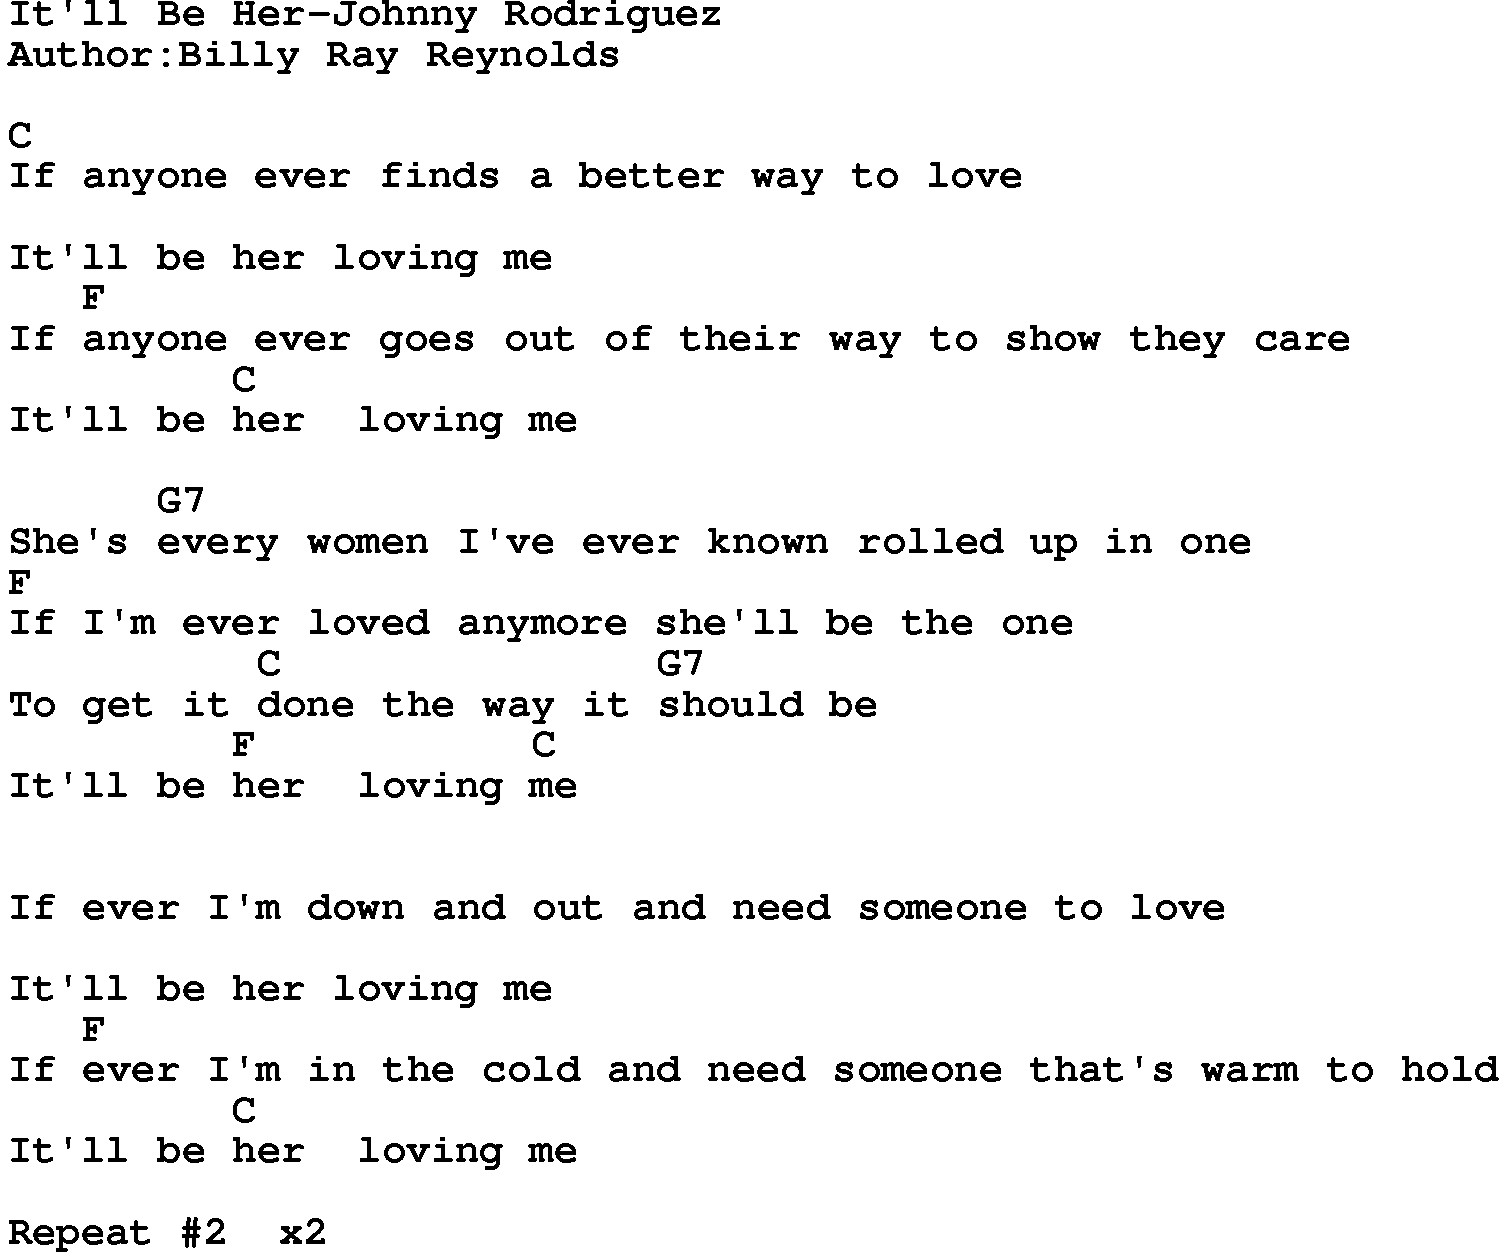 Country music song: It'll Be Her-Johnny Rodriguez lyrics and chords